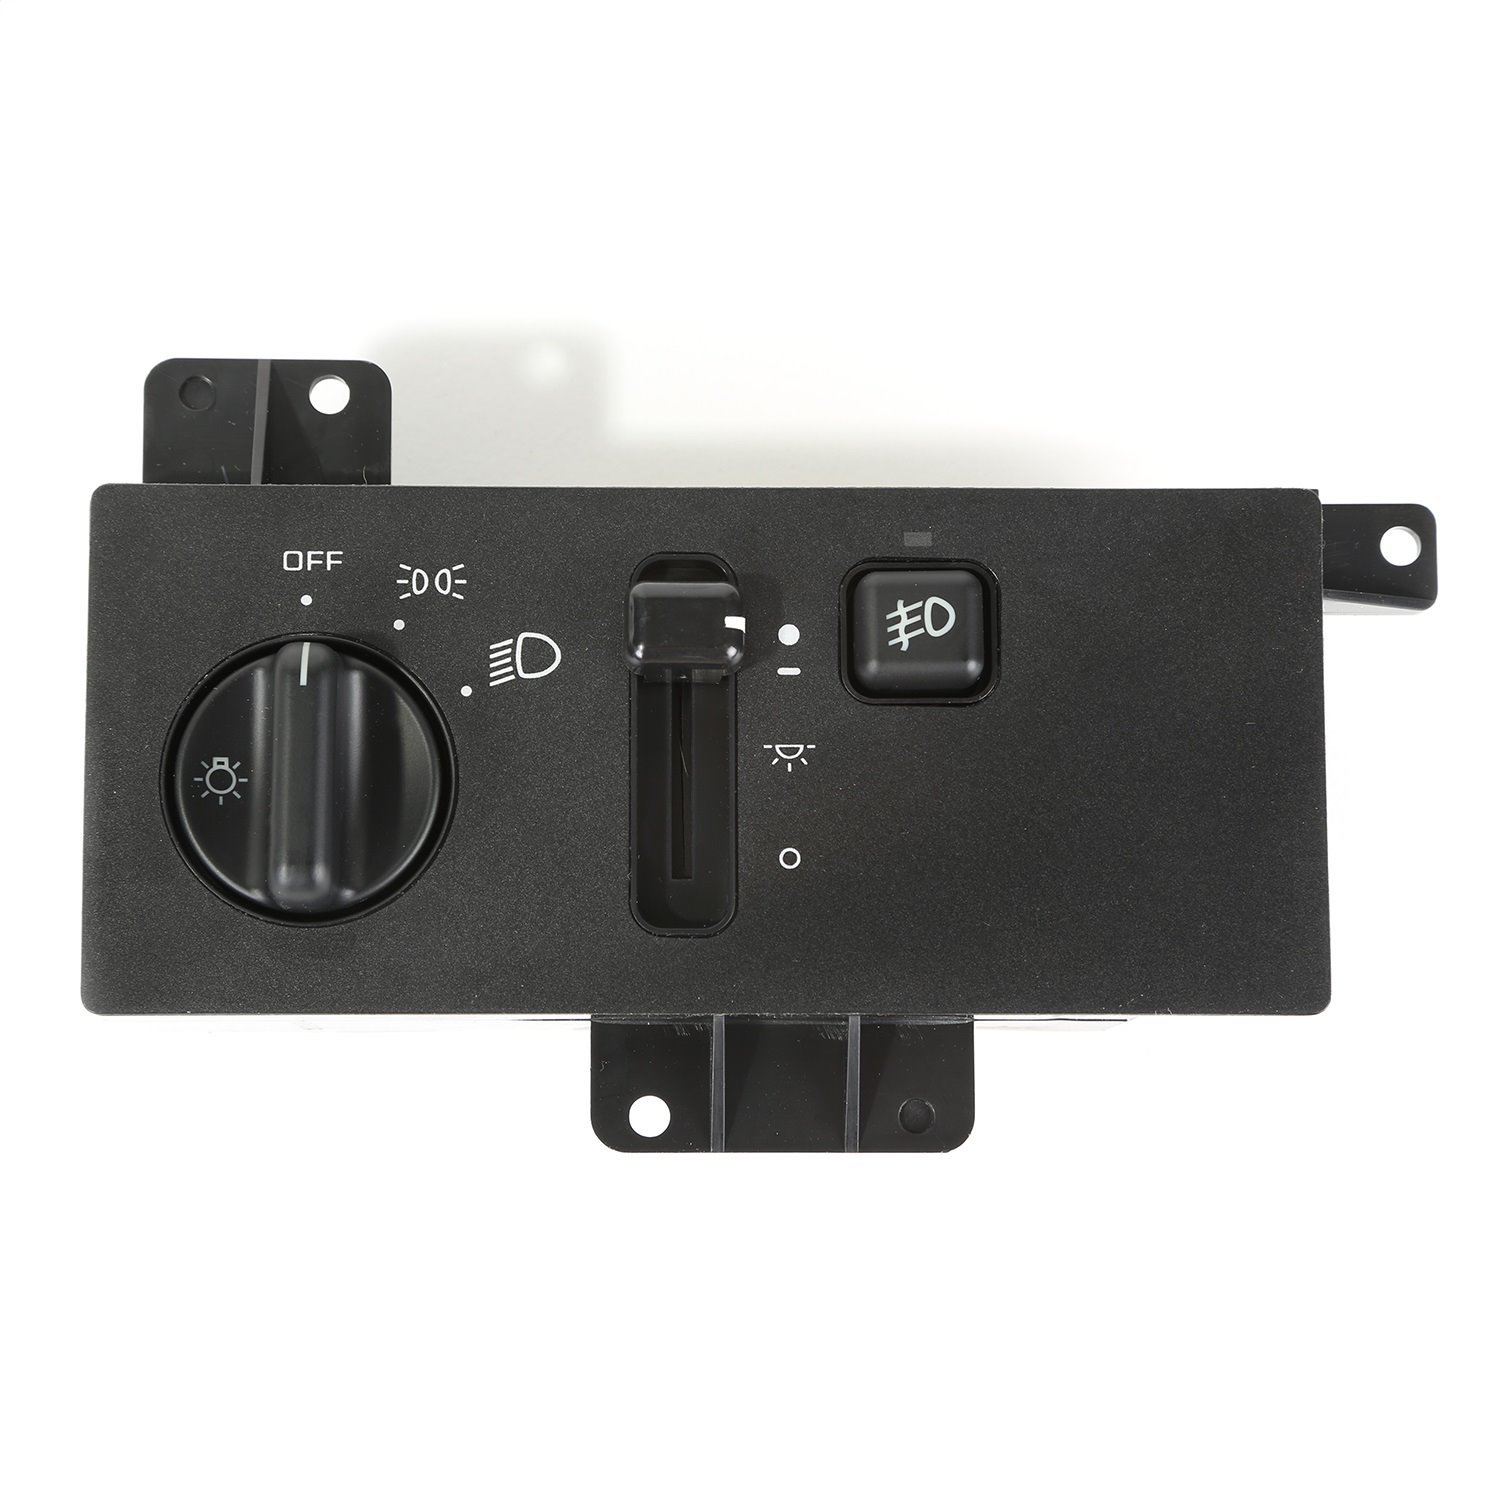 This headlight switch from Omix-ADA fits 96-98 Jeep Grand Cherokees with fog lights but without automatic headlights.